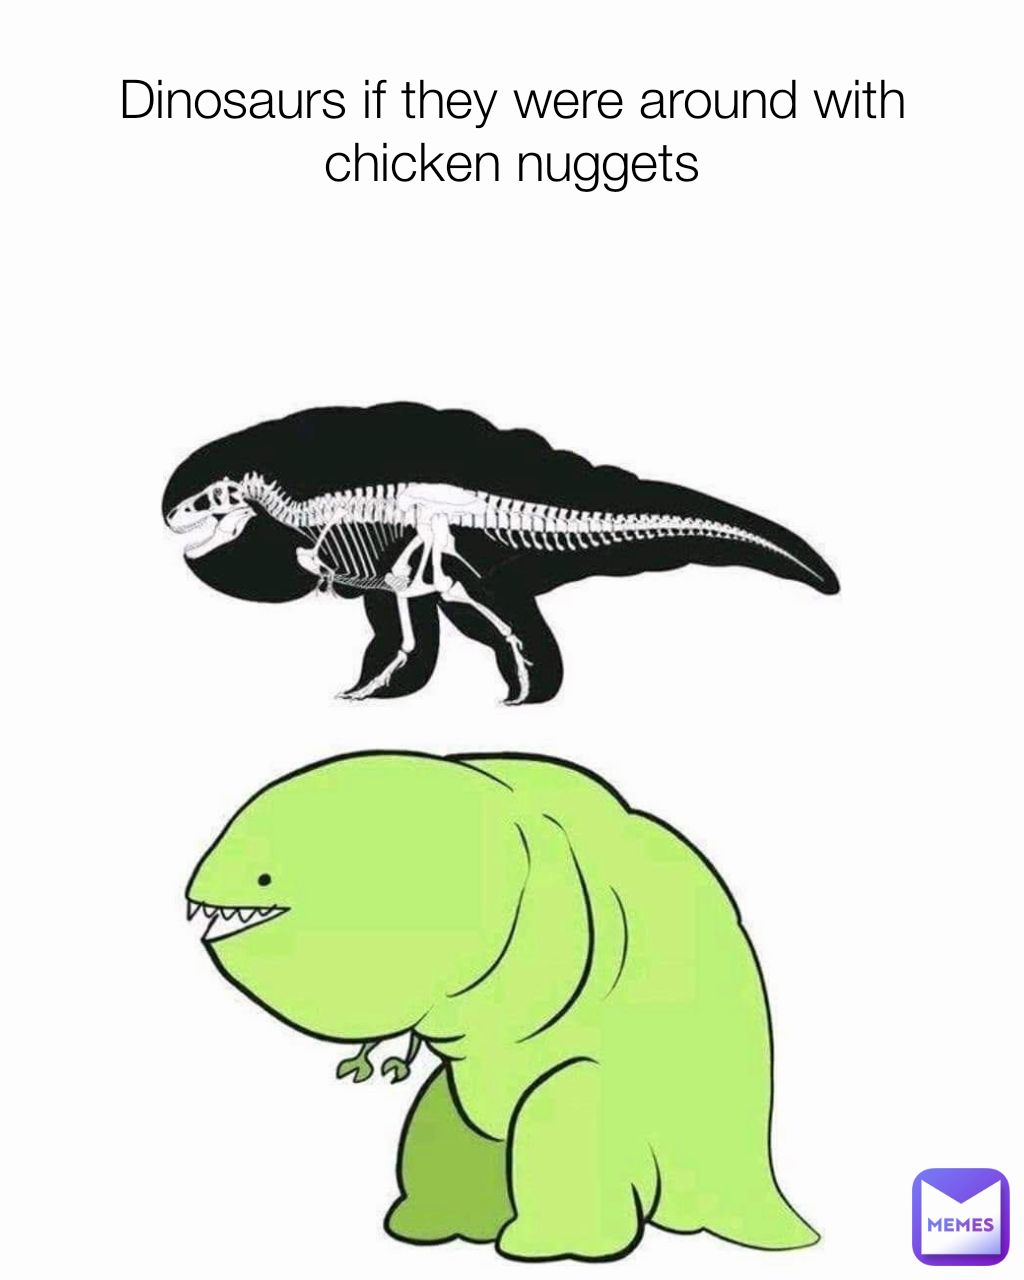 Dinosaurs if they were around with chicken nuggets